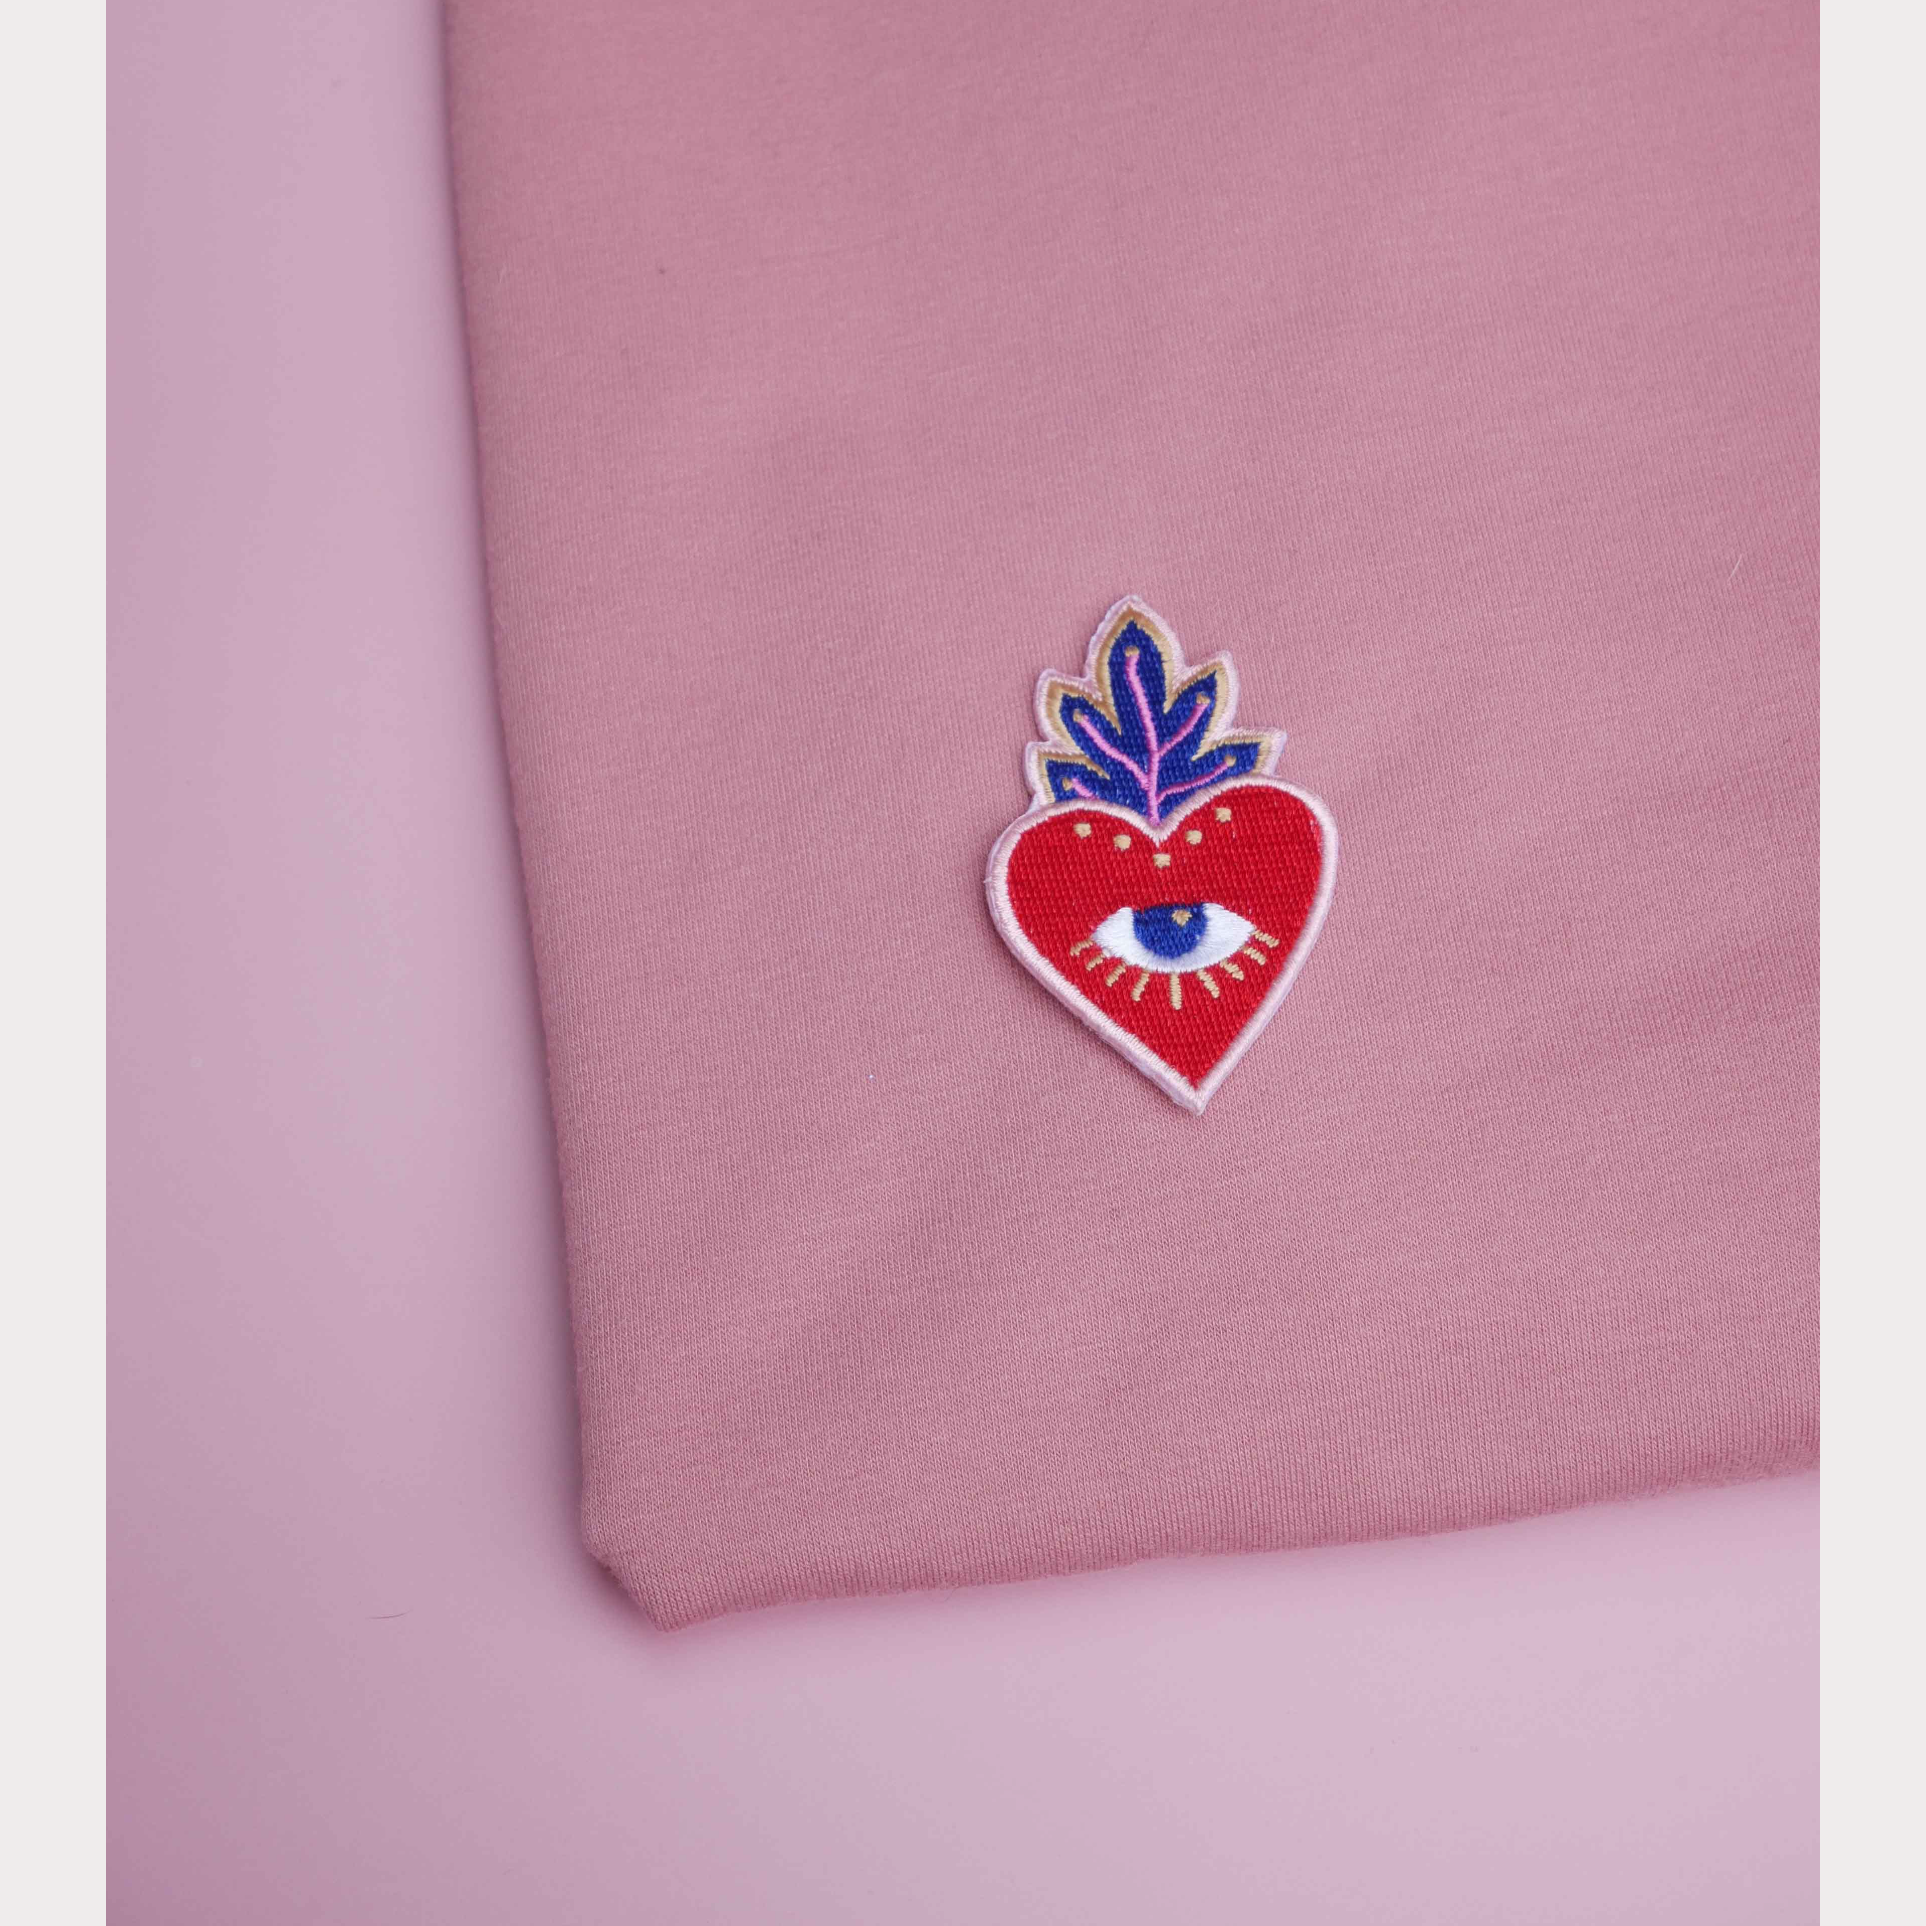 Sacred Heart Iron-on Patch hecates light cottagecore metaphysical occult magic witchcraft tarot oracle cards witch tools